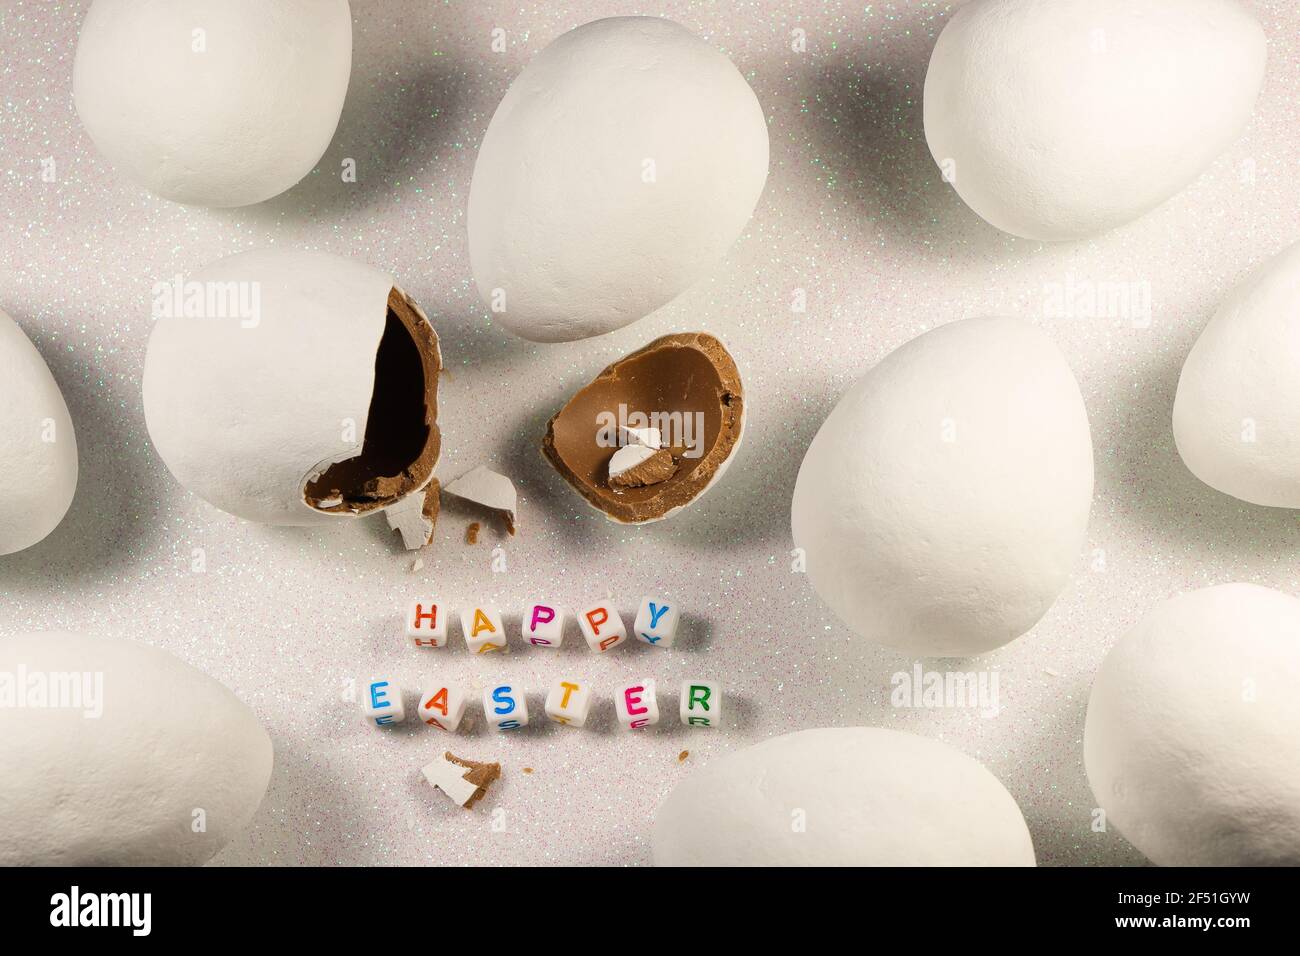 Happy Easter Chocolate Candy Eggs on Snowy White Foto Stock